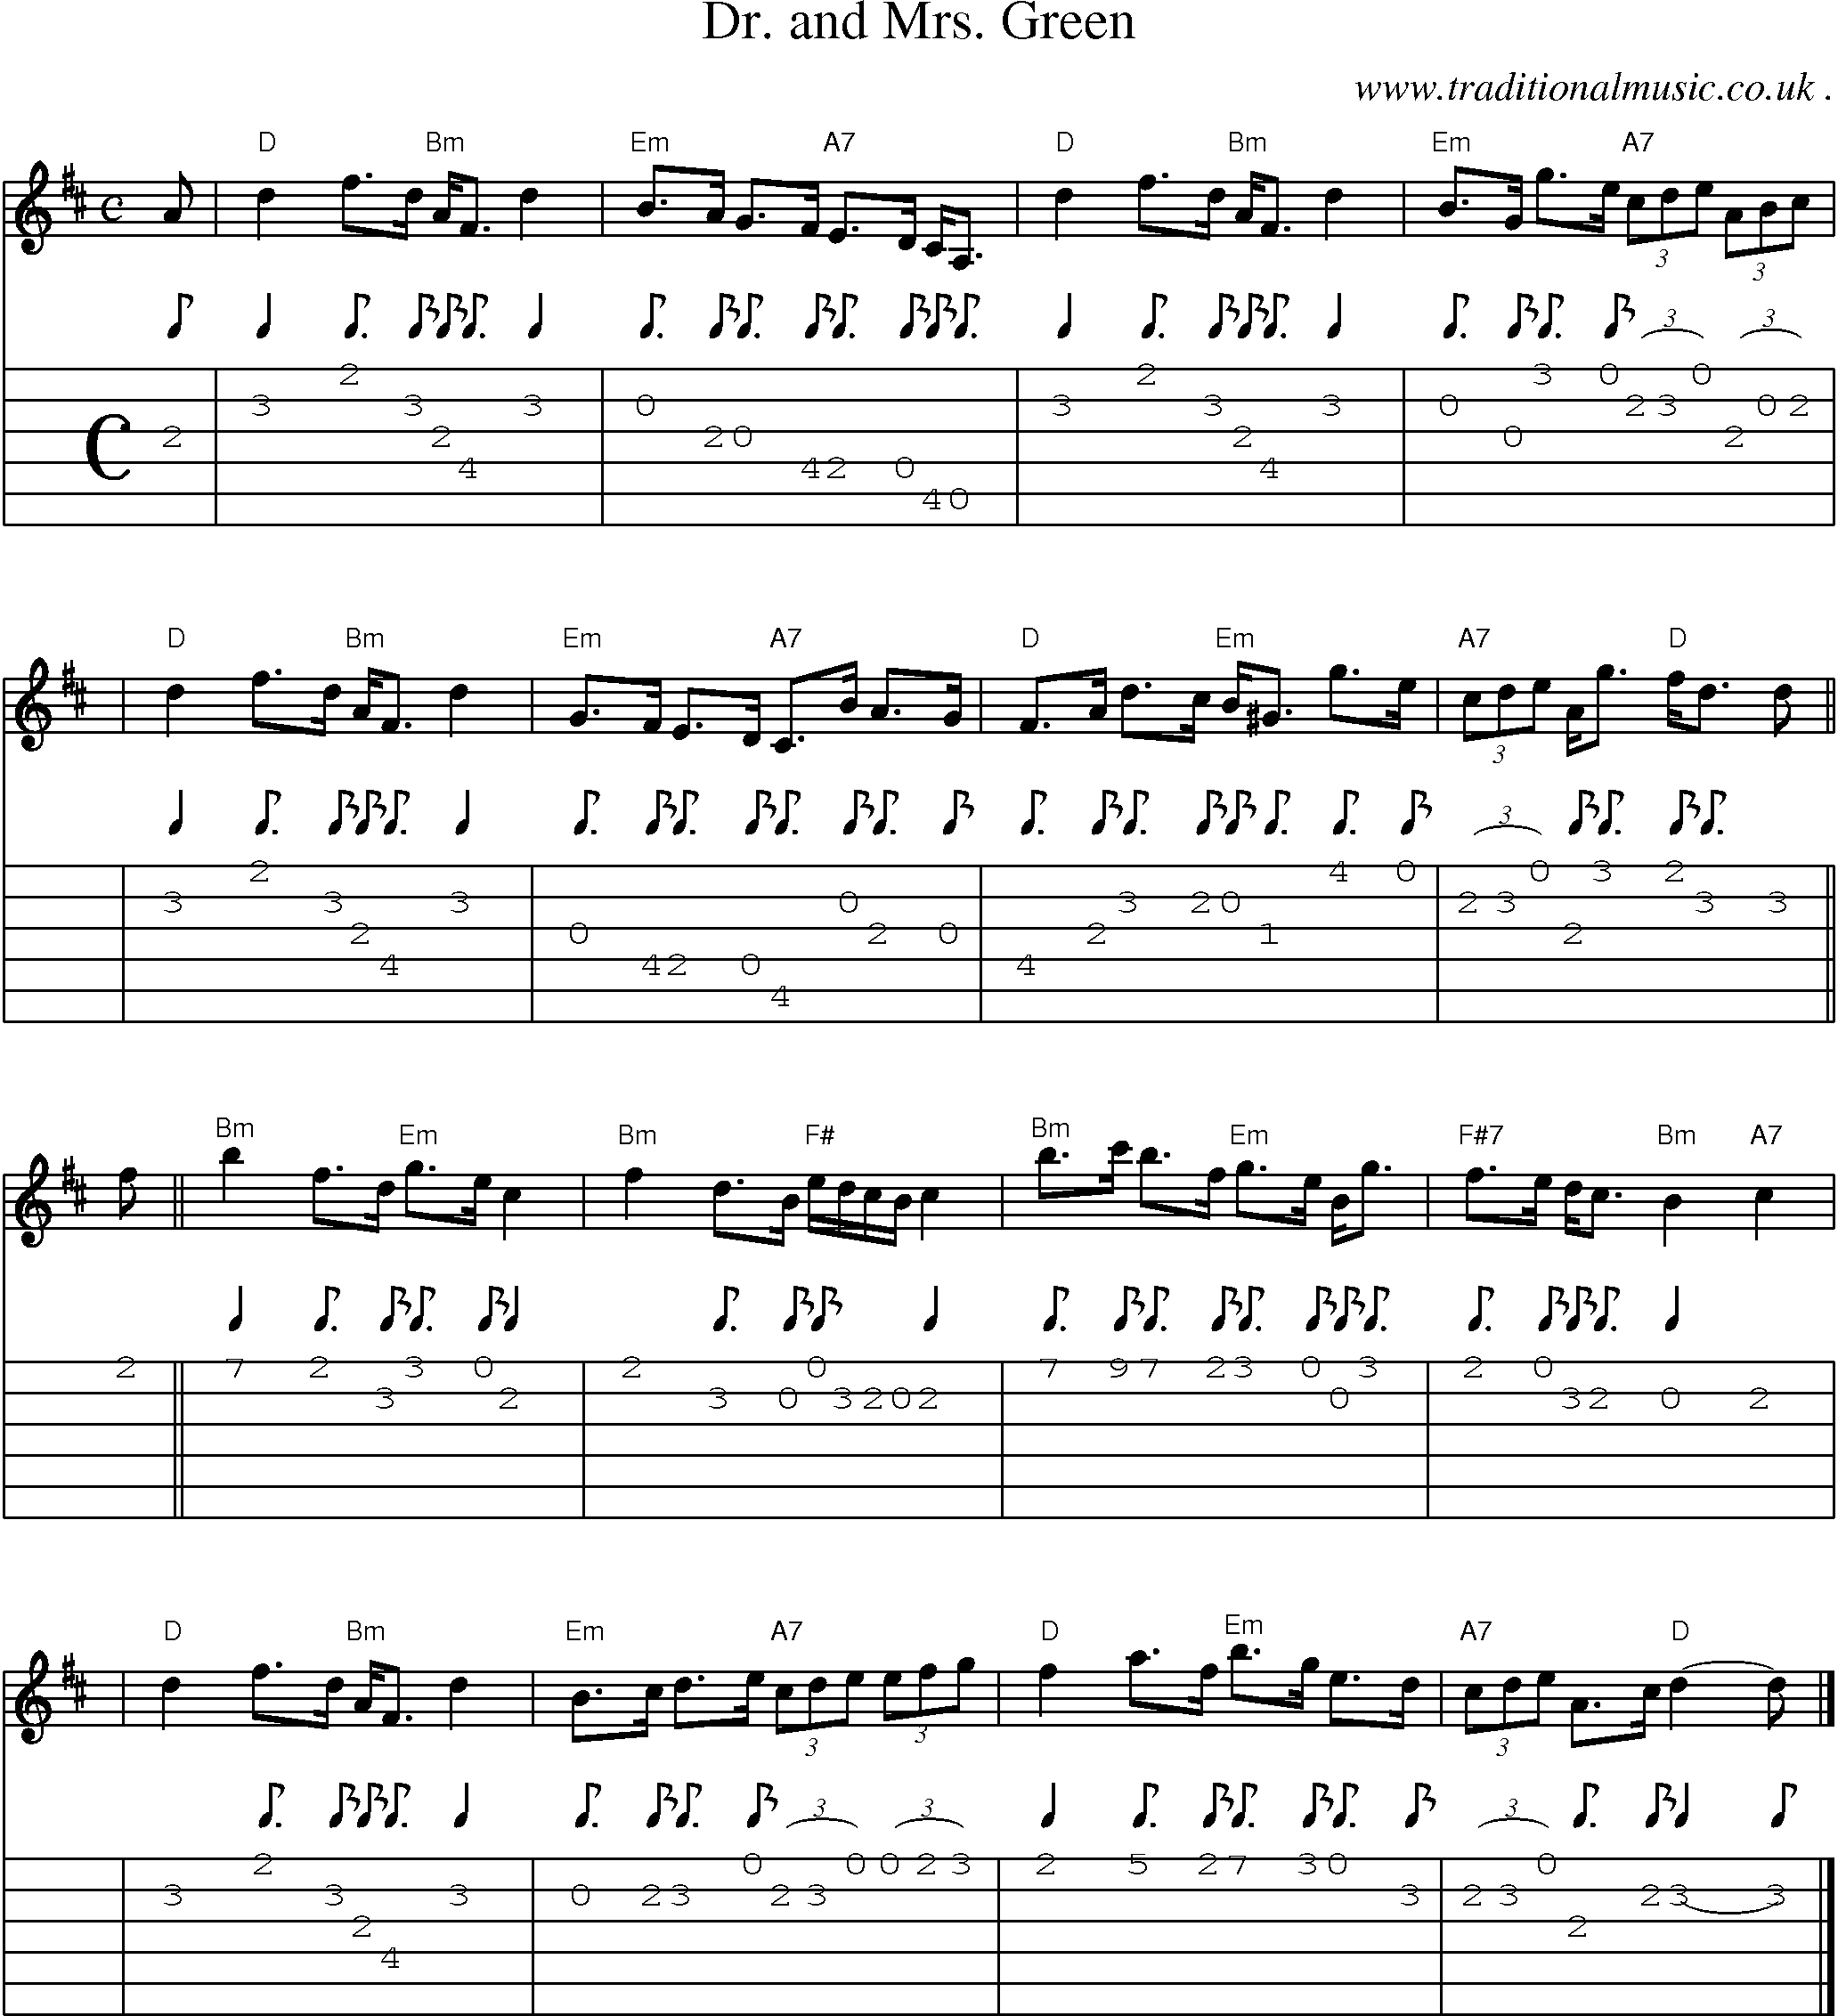 Sheet-music  score, Chords and Guitar Tabs for Dr And Mrs Green